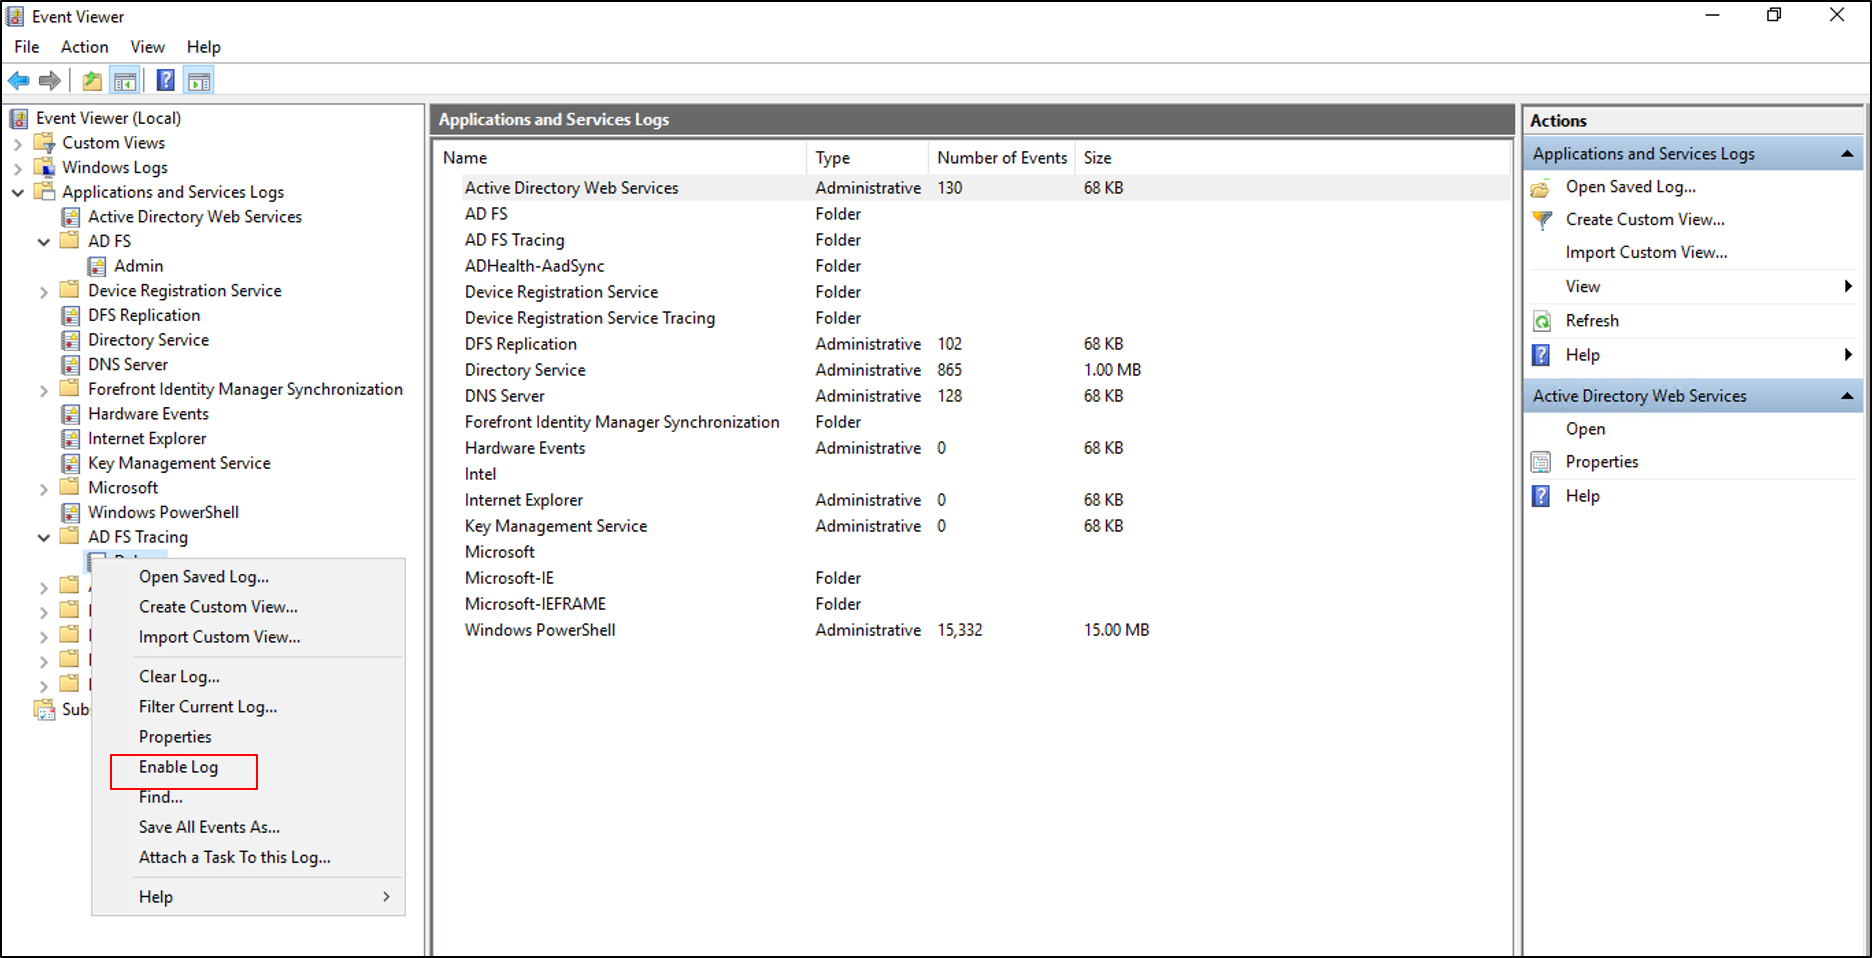 Screenshot of the Event Viewer showing that the user right-clicked Debug with the Enable Log option called out.